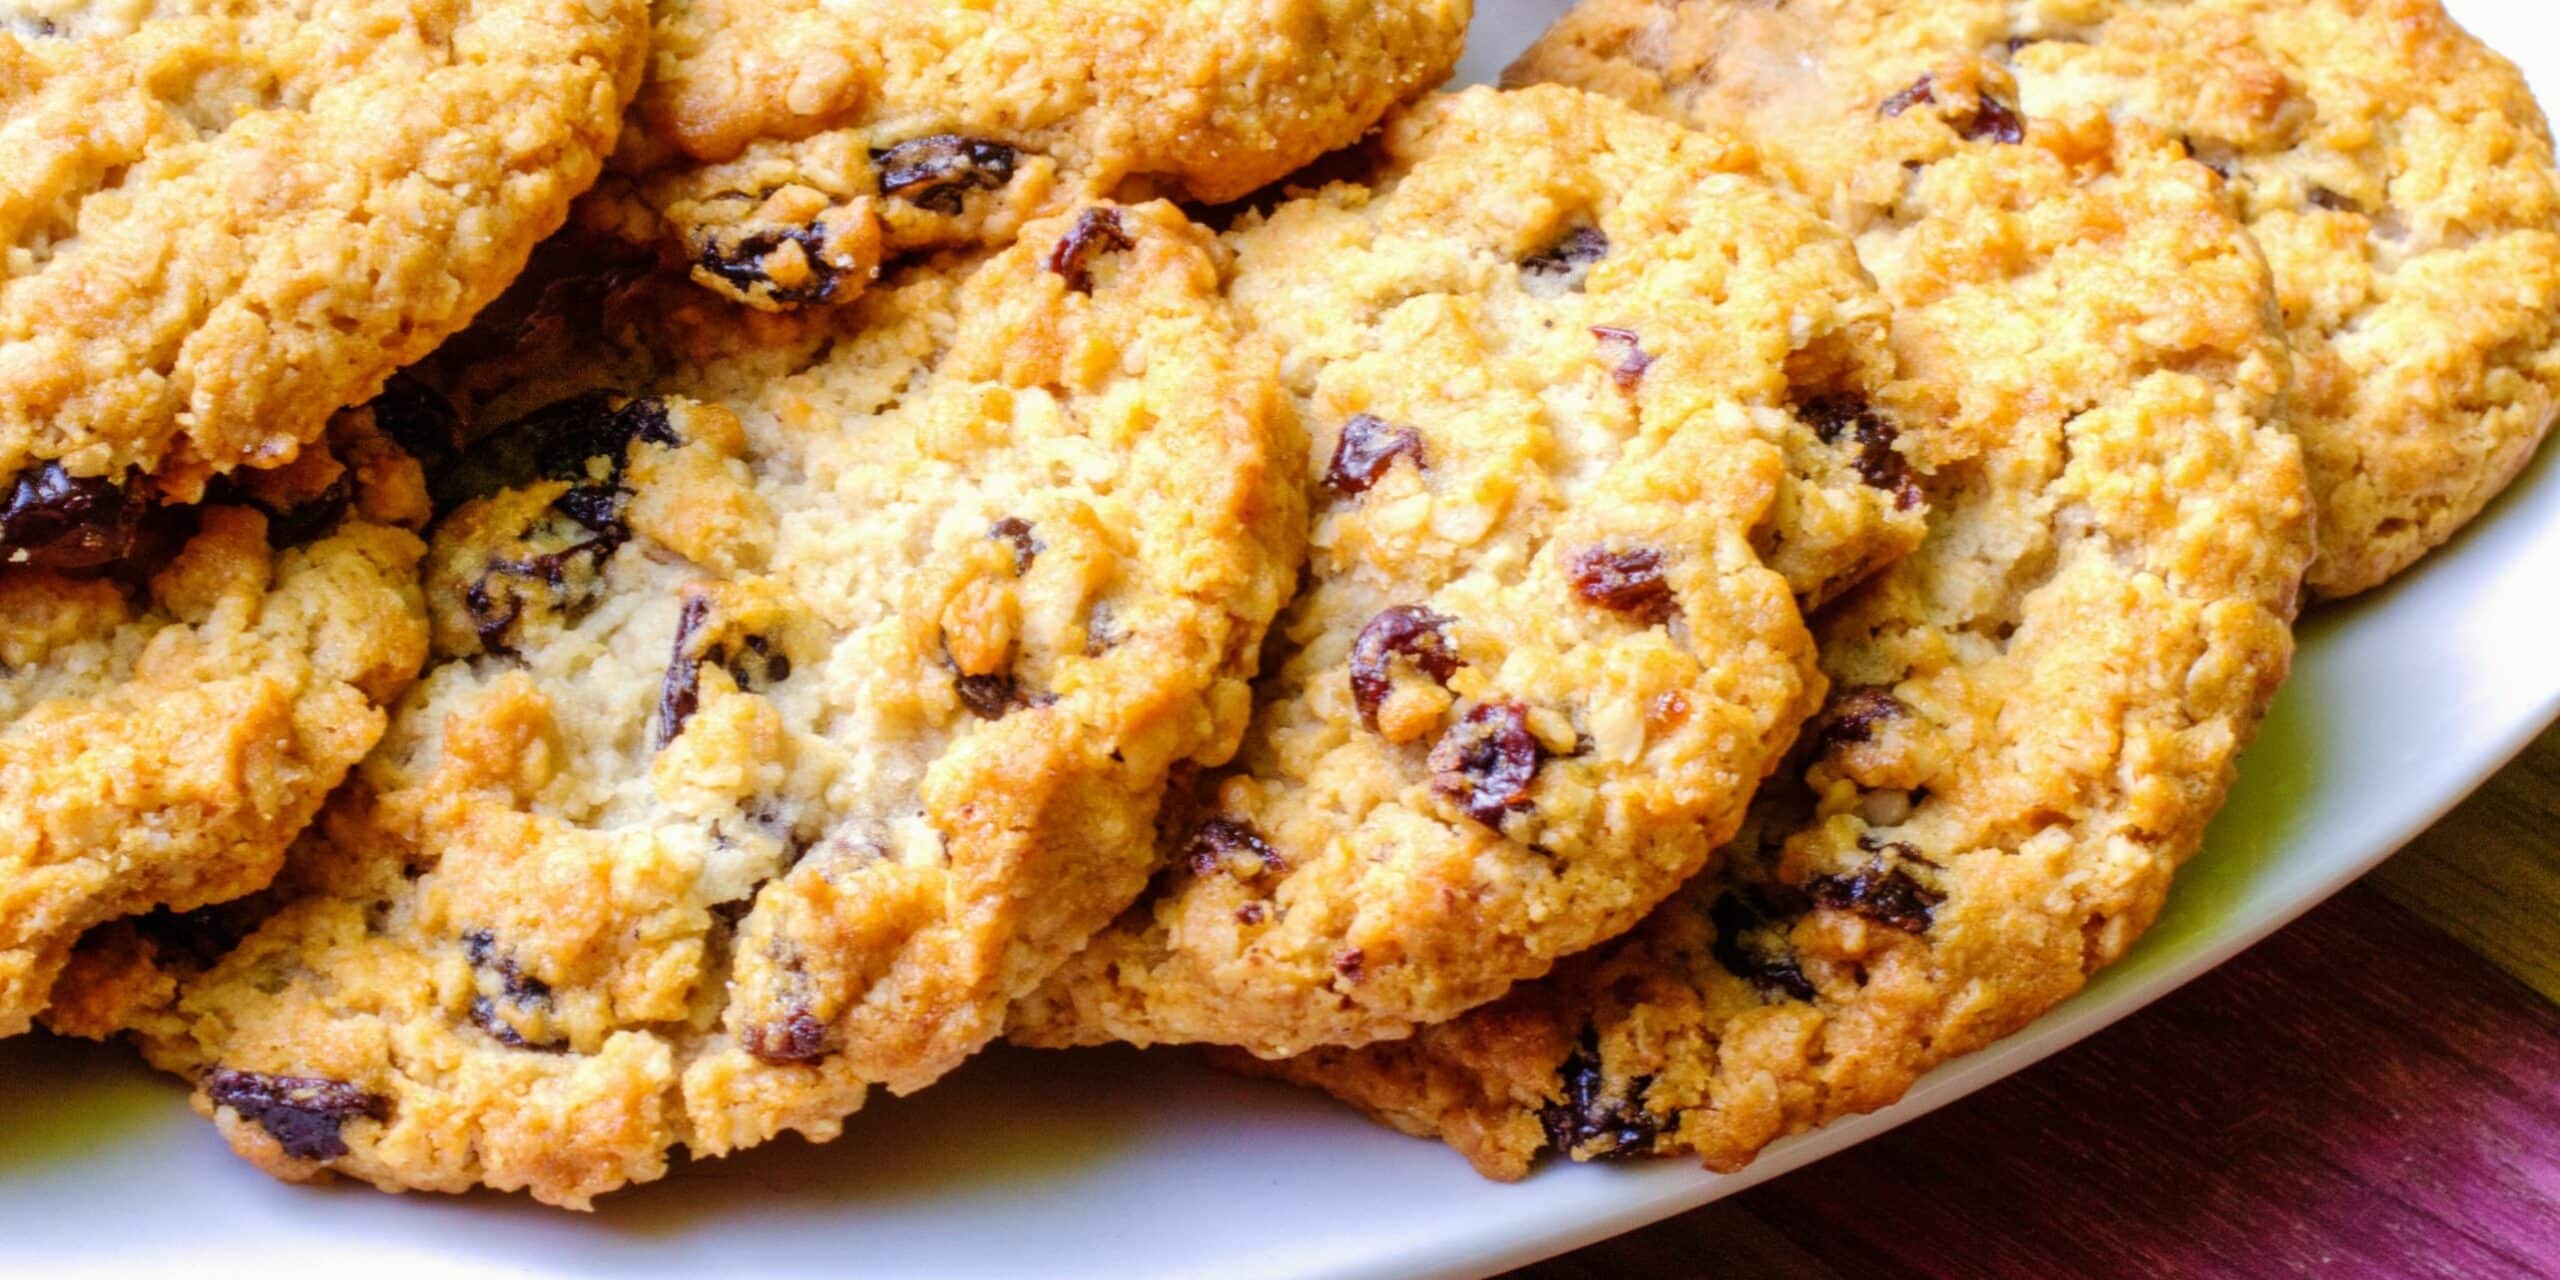 oatmeal raisin cookies, the lactogenic foods used in the study